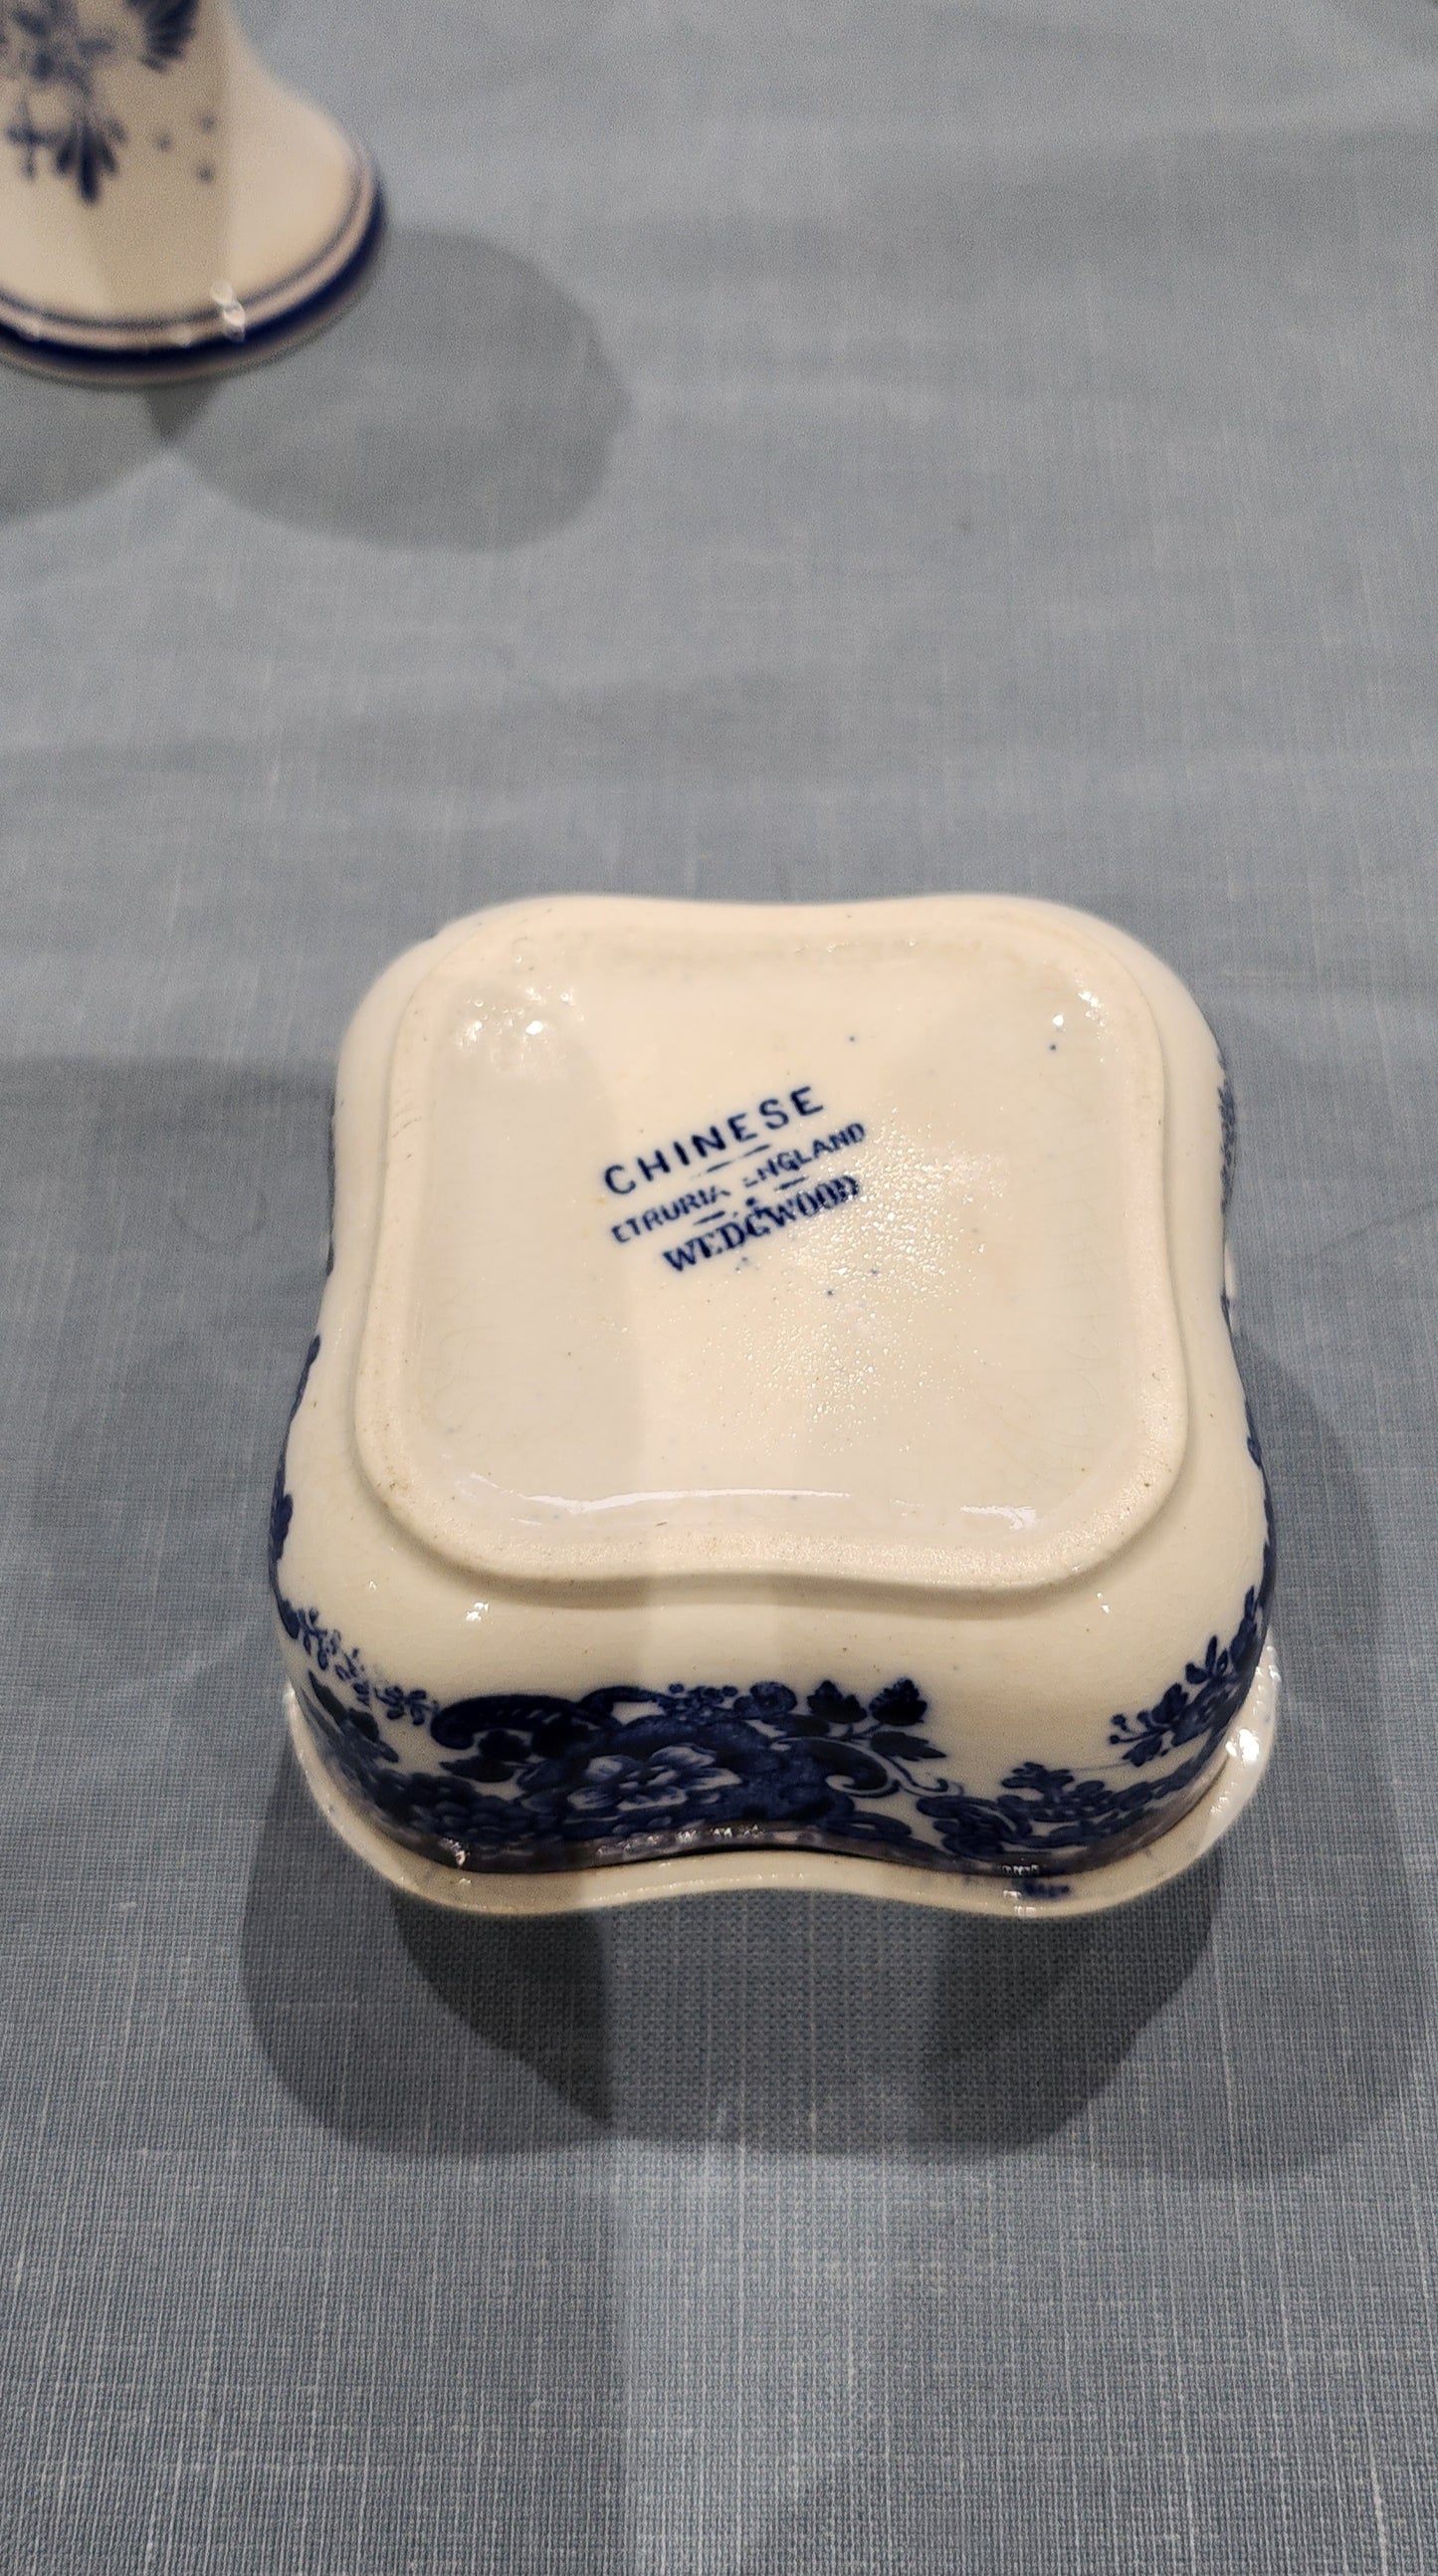 Rare Wedgwood Etruria blue and white jewelkery box/ tinket box- Chinese series early 1900